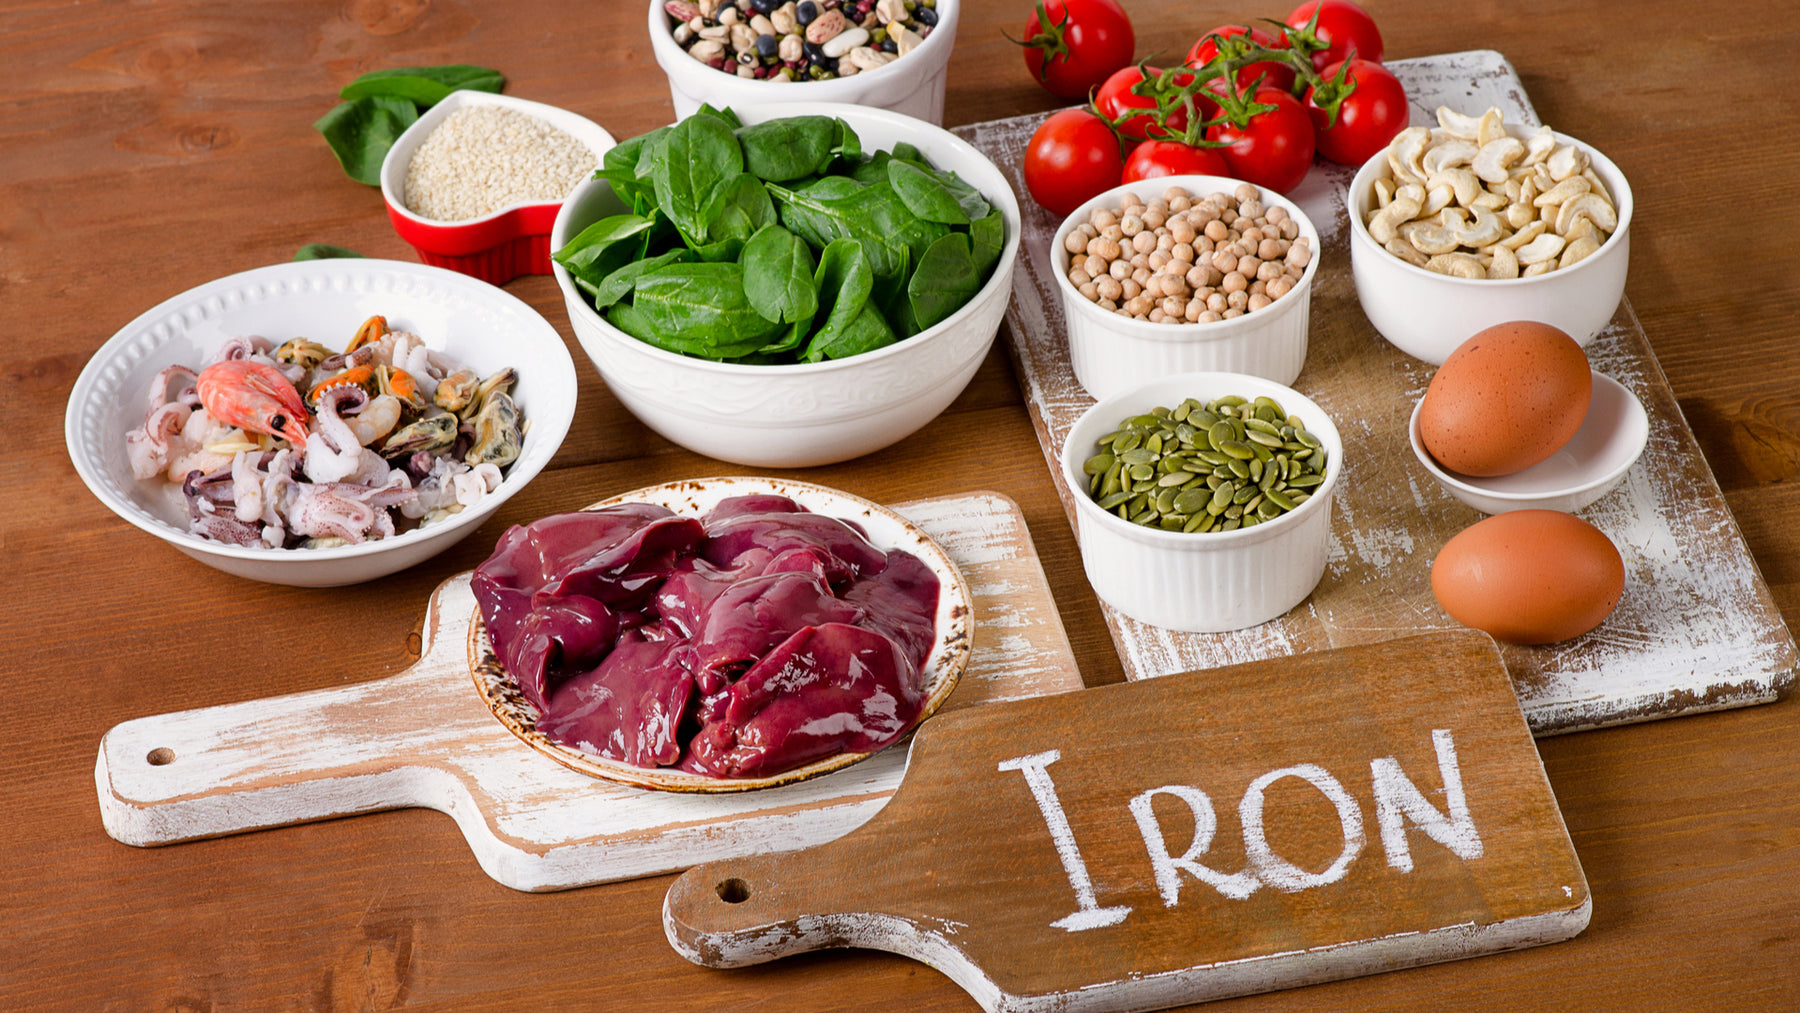 Top 8 Iron Rich Foods